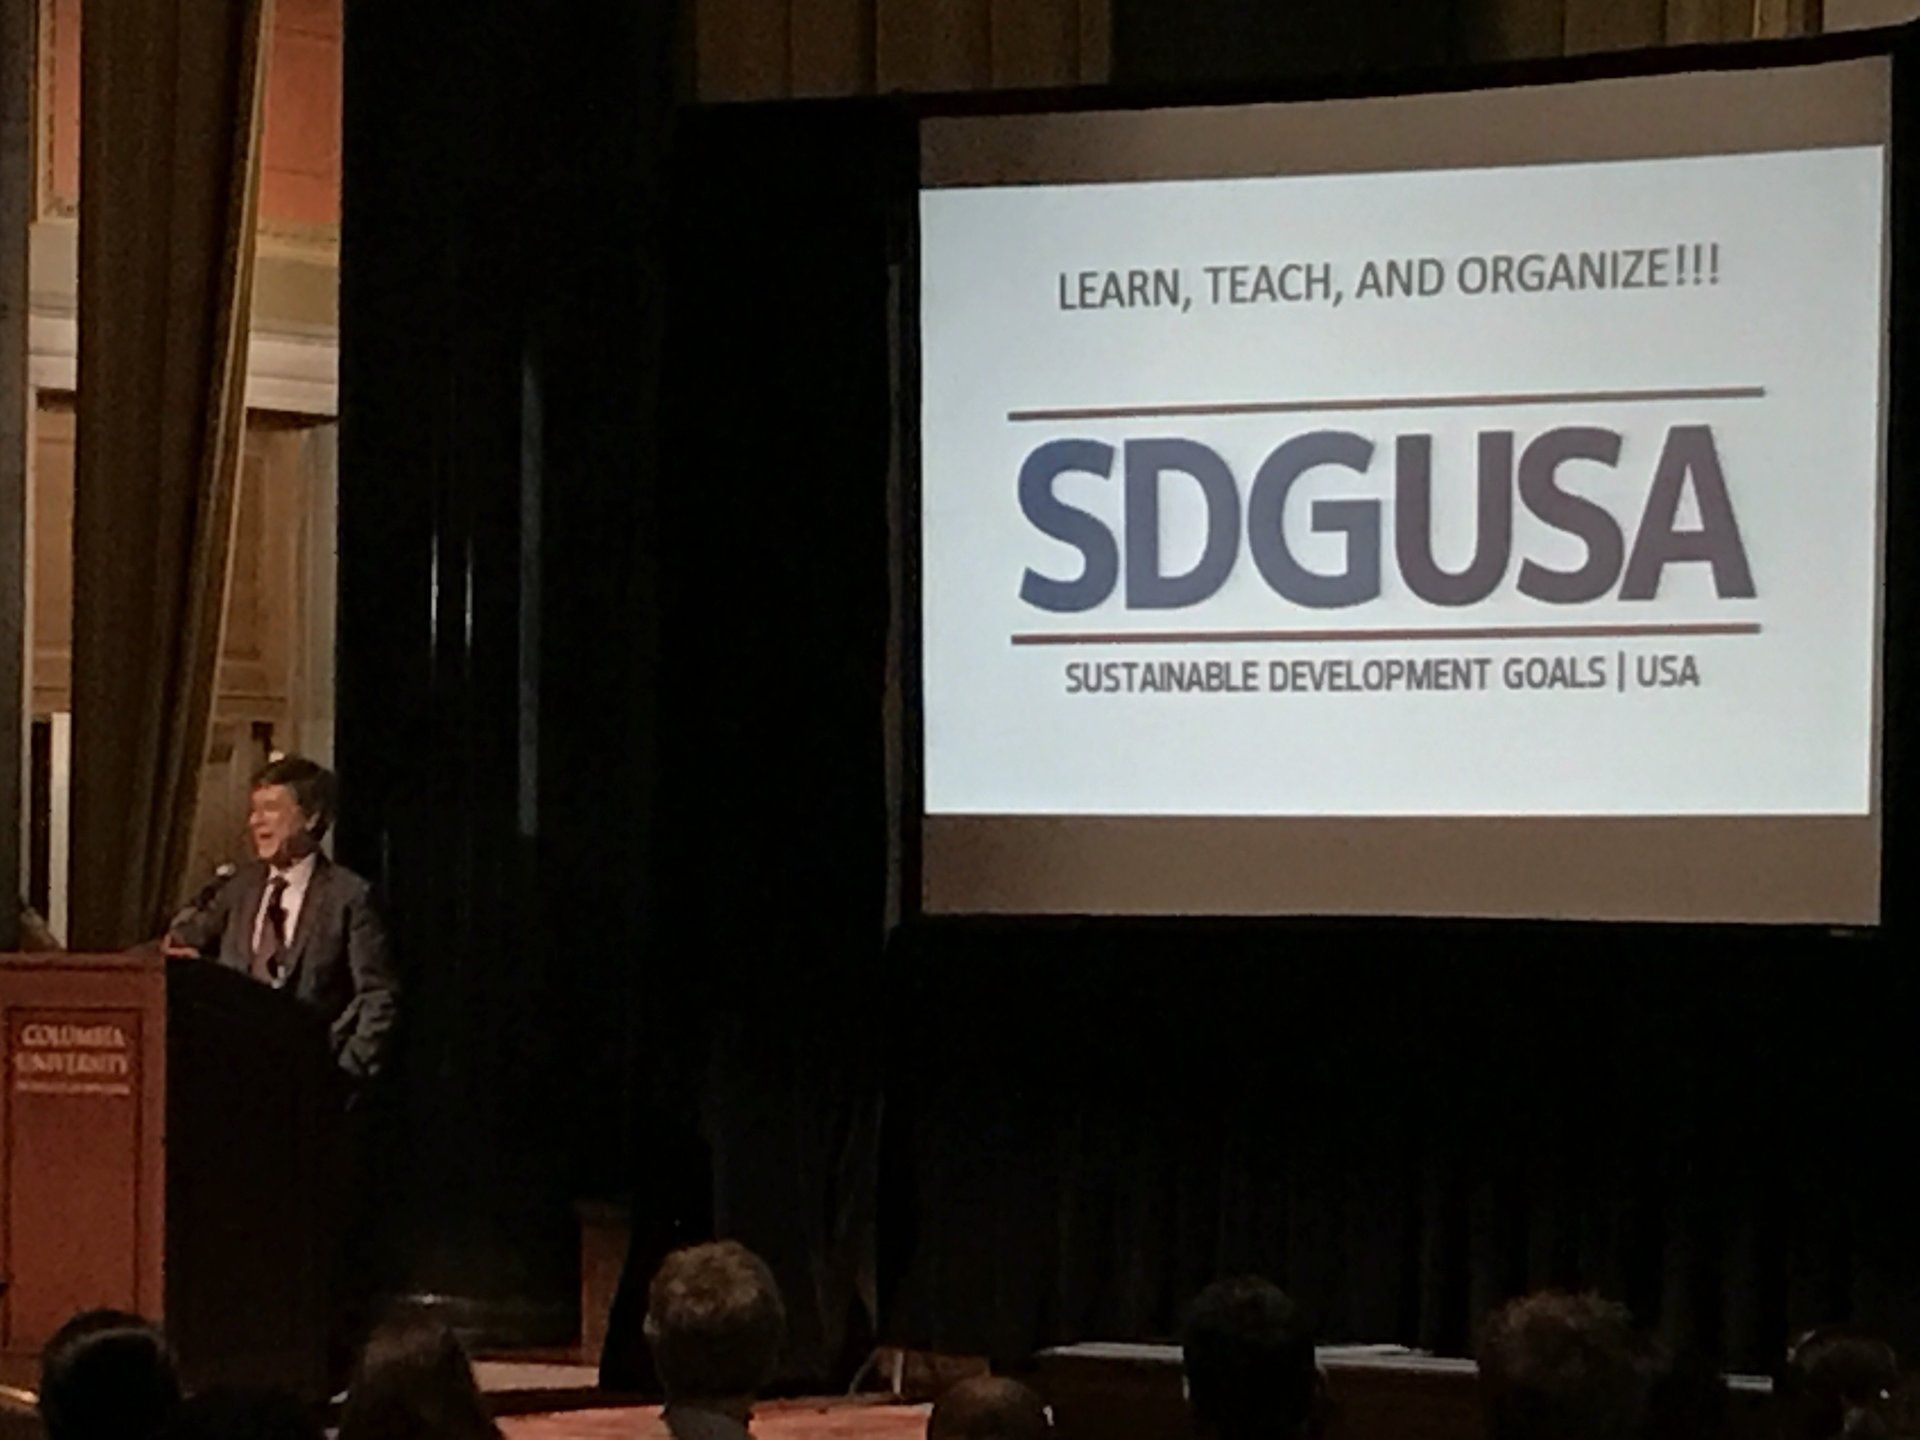 Sustainable Development Goals (SDGUSA) in the USA